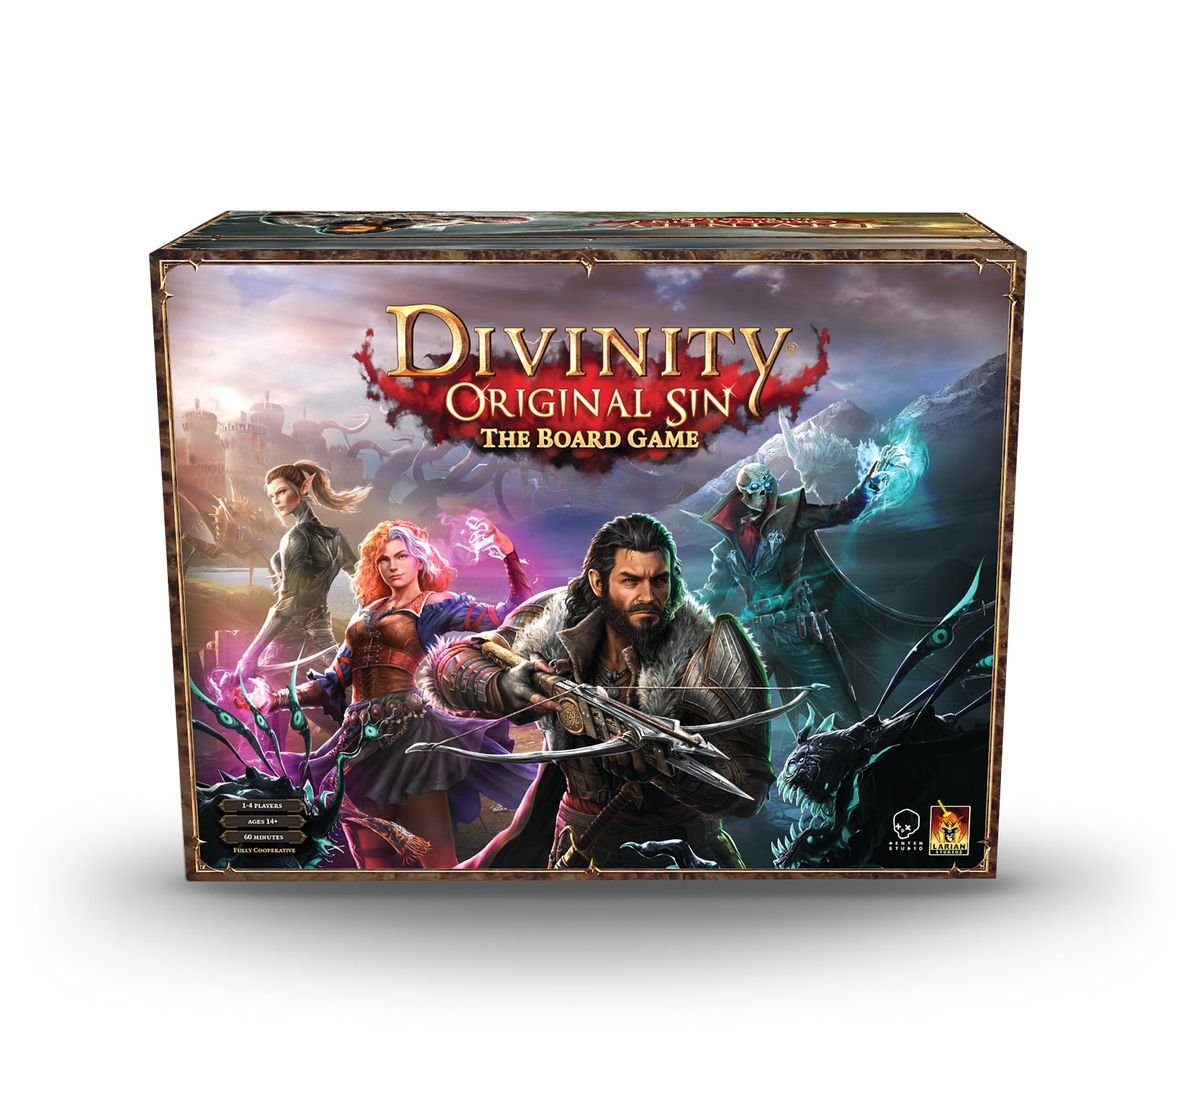 The box for the Divinity: Original Sin board game